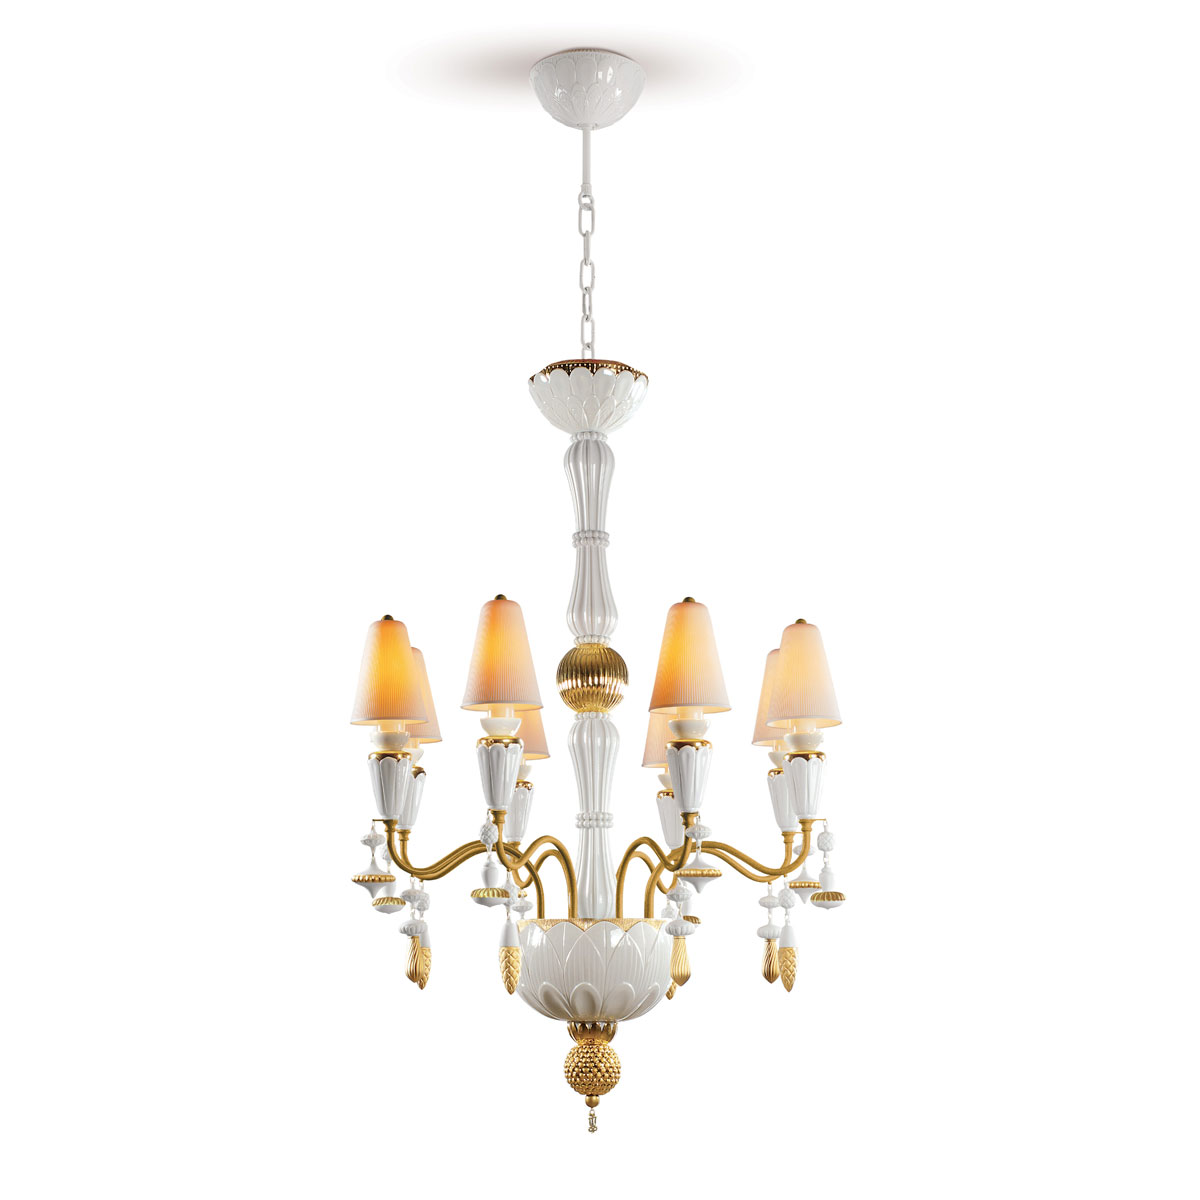 Lladro Classic Lighting, Ivy And Seed 8 Lights Chandelier. Golden Luster